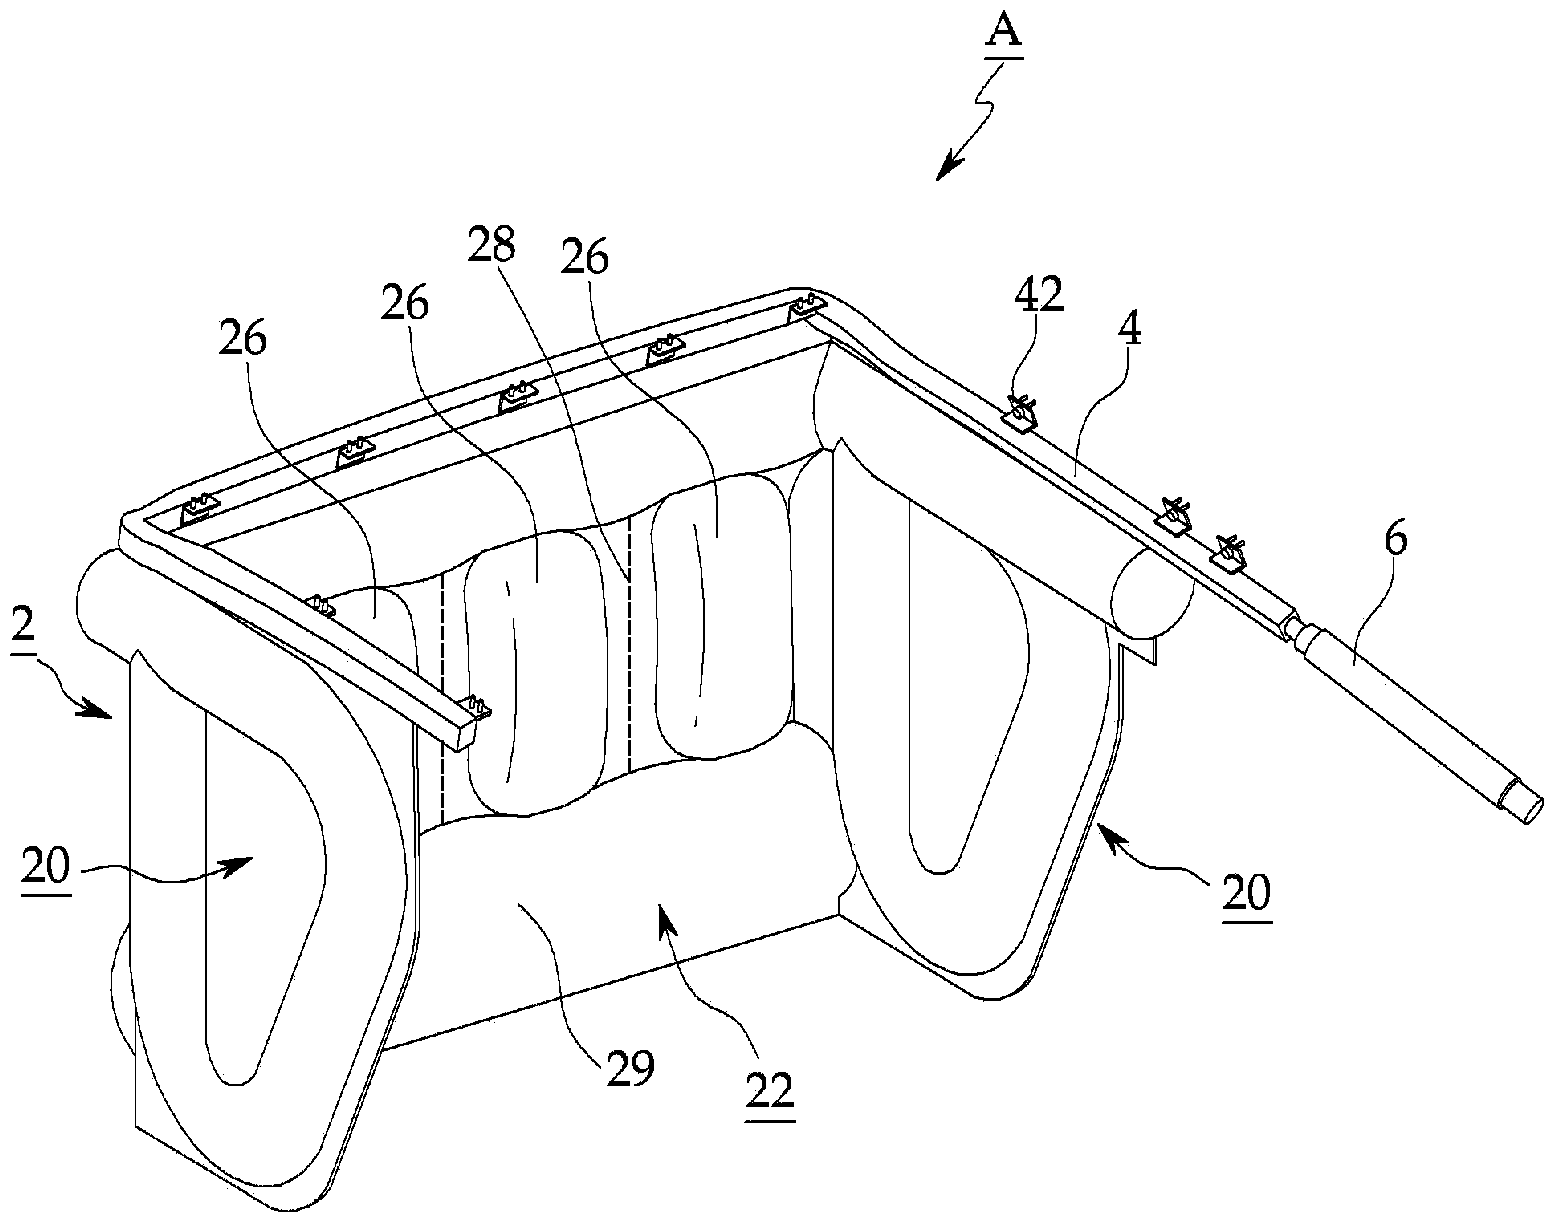 Unification airbag module